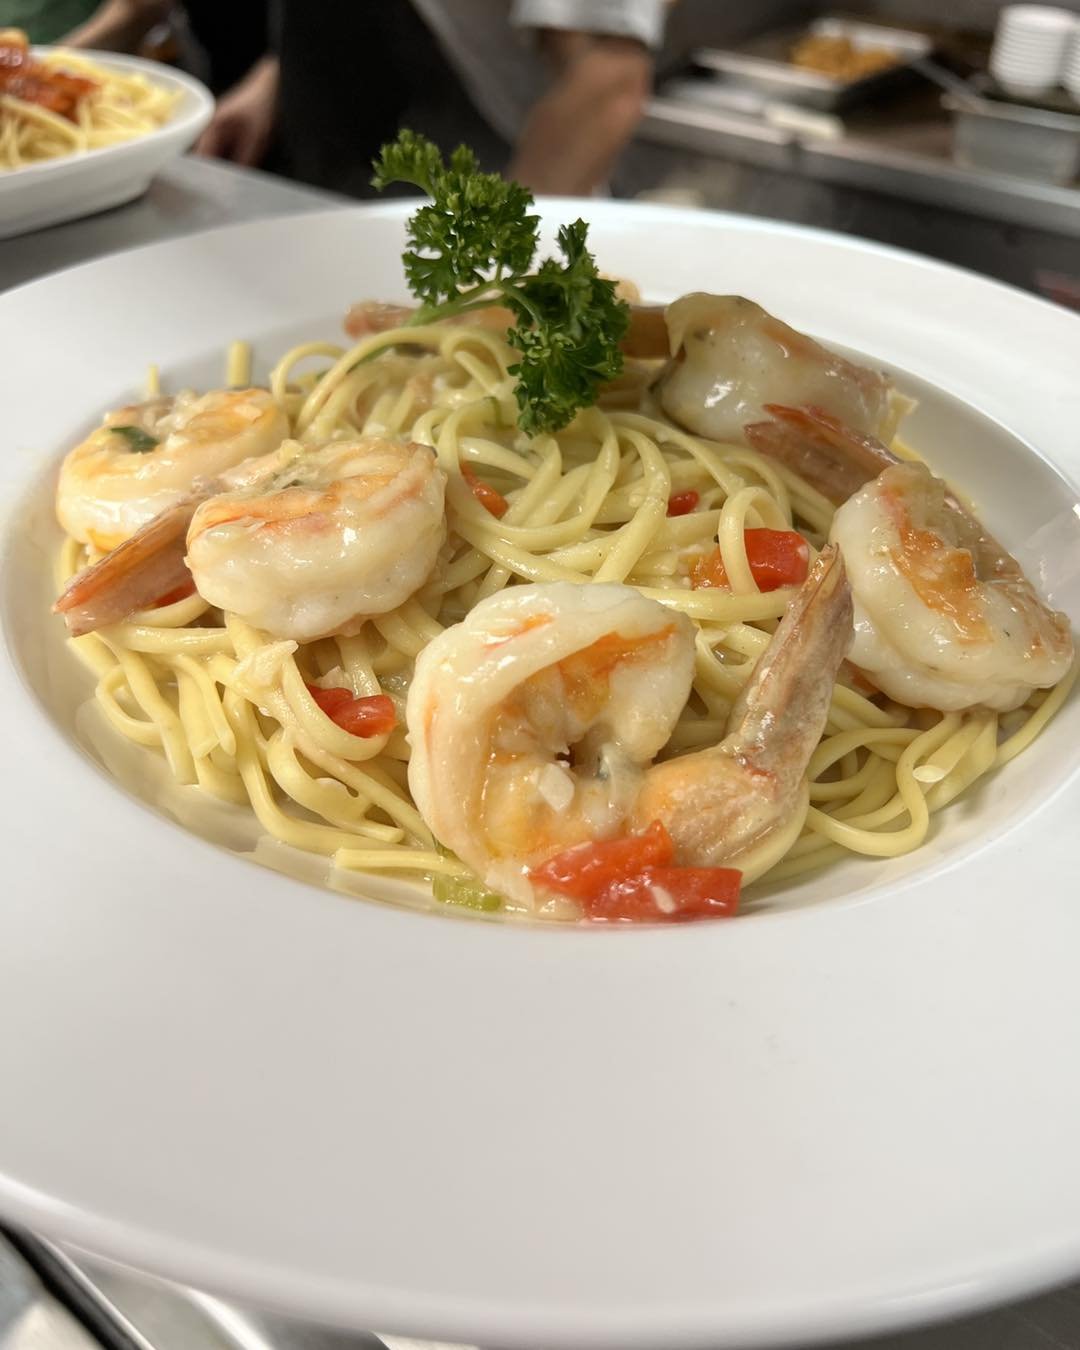 Shrimp Scampi for Dinner!!! 🔥🔥🔥🔥

18th &amp; the Boardwalk in North Wildwood
View our Menu📲www.theadamsrestaurant.com